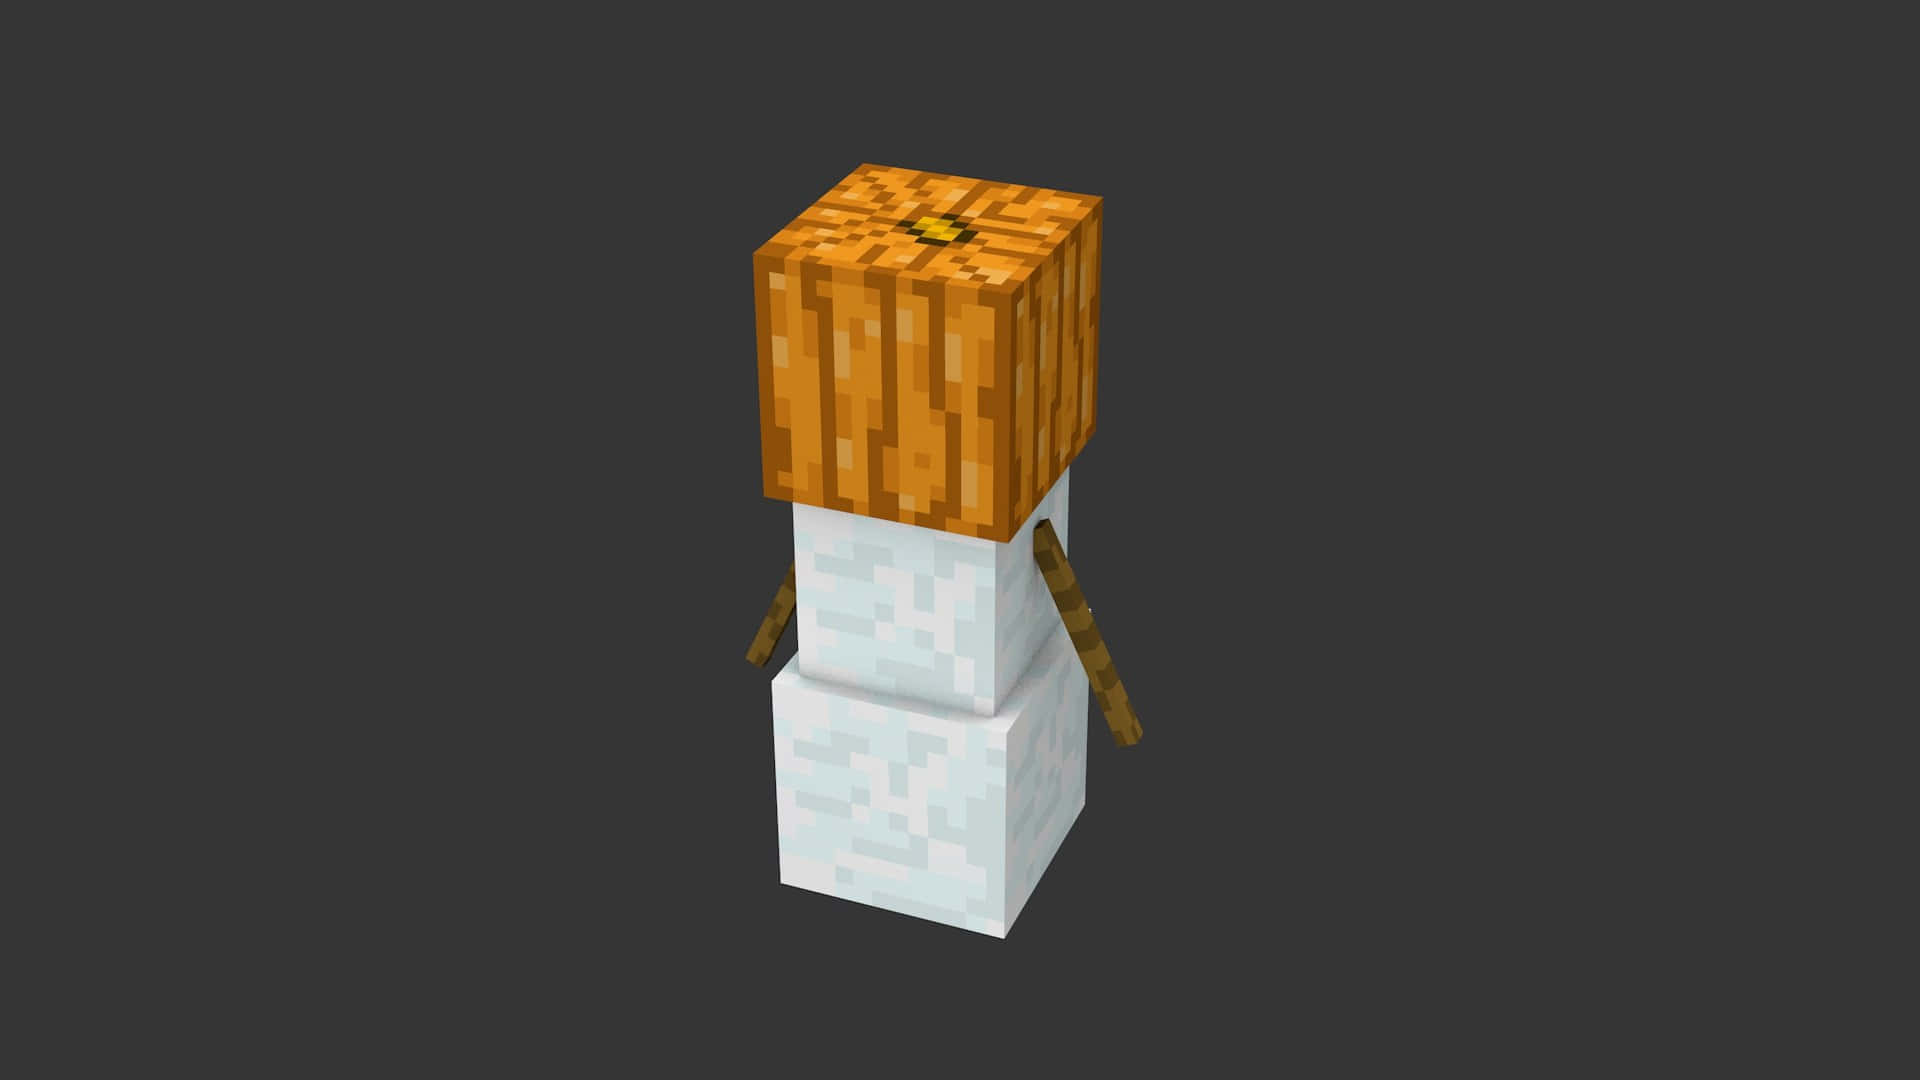 A Minecraft Snow Golem standing tall in a snowy setting Wallpaper